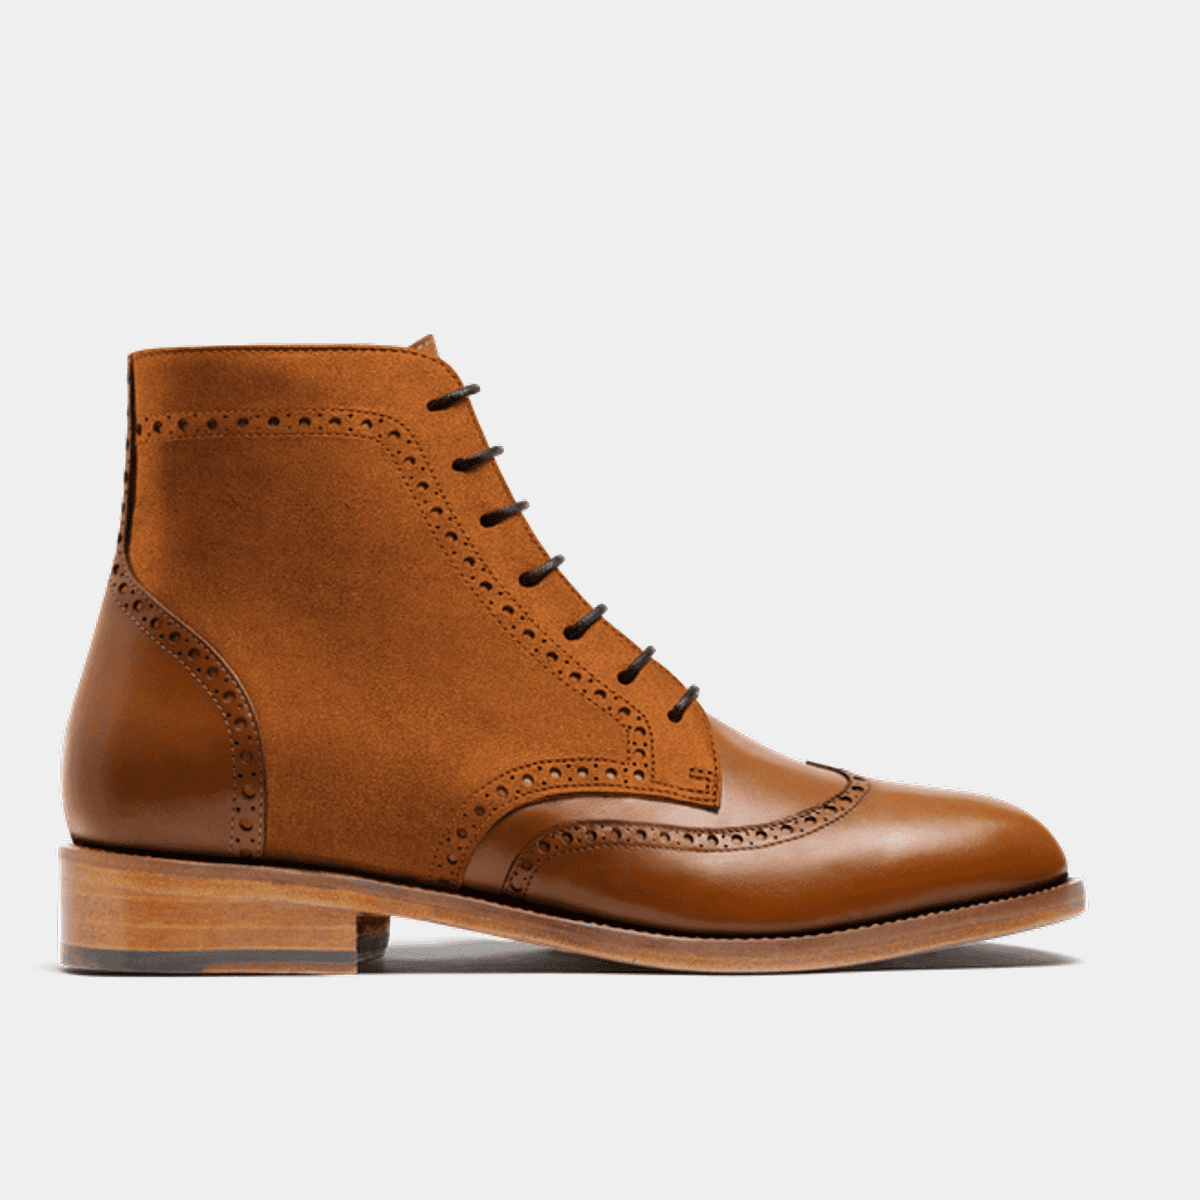 Brogue Women Boots - brown leather & suede $257 | Sumissura